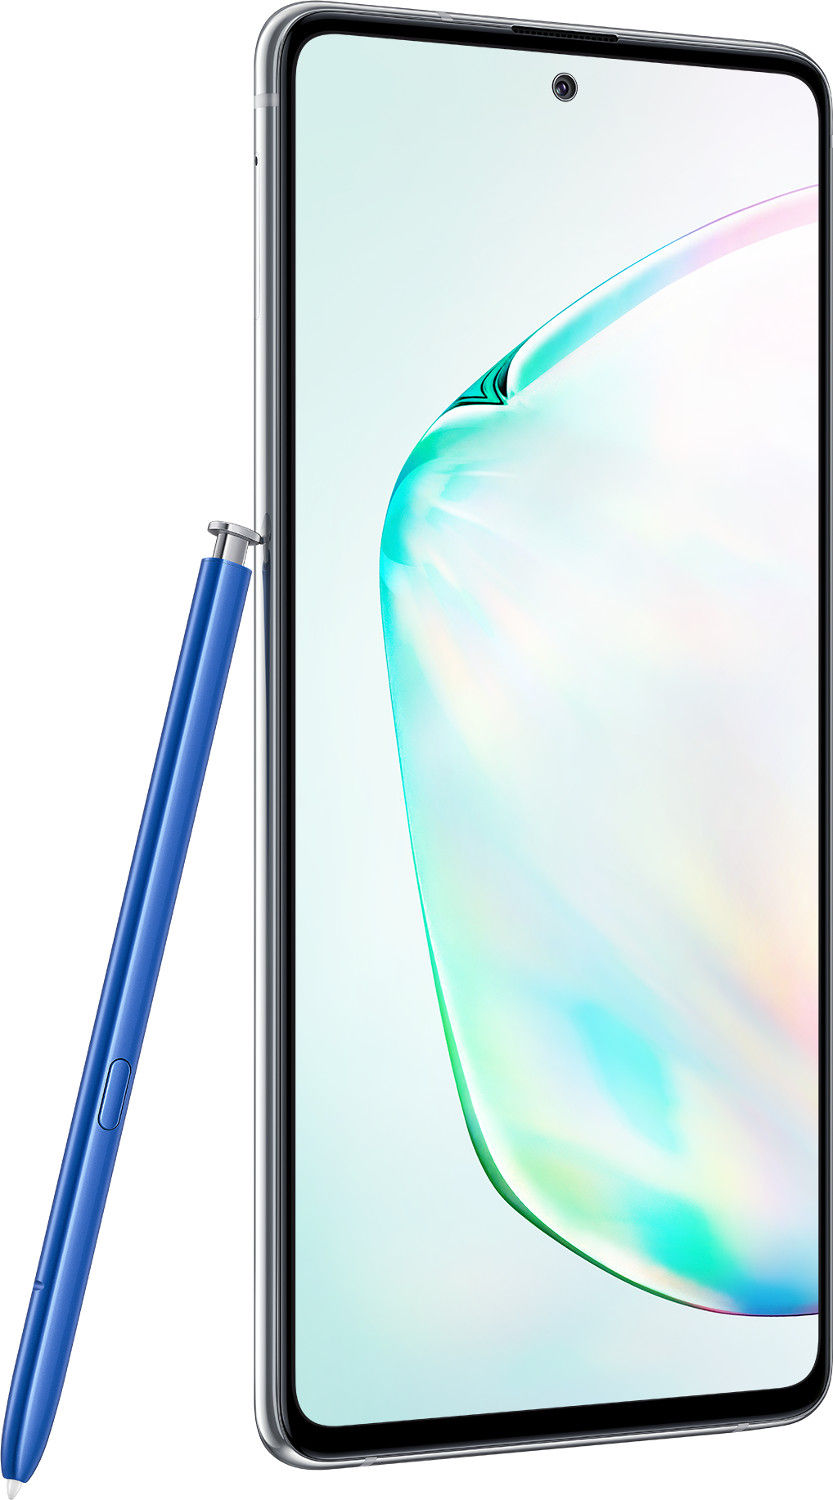 Samsung Galaxy Note 10 Lite - Price in India, Full Specs (29th January ...